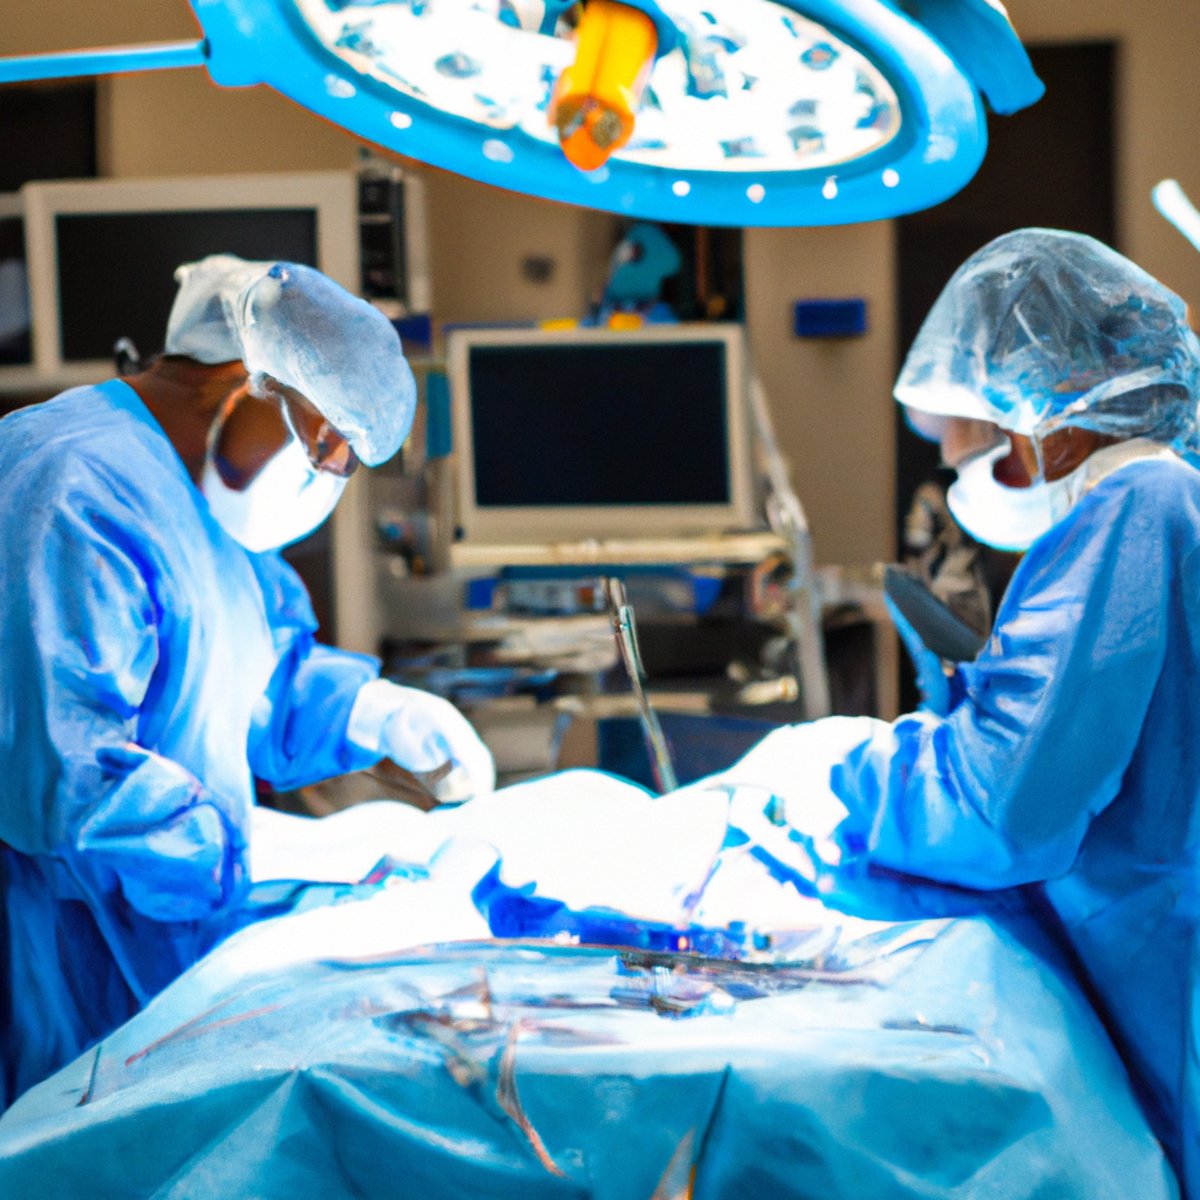 Surgical setting with medical professionals, equipment, and tools, preparing for annular pancreas surgery.